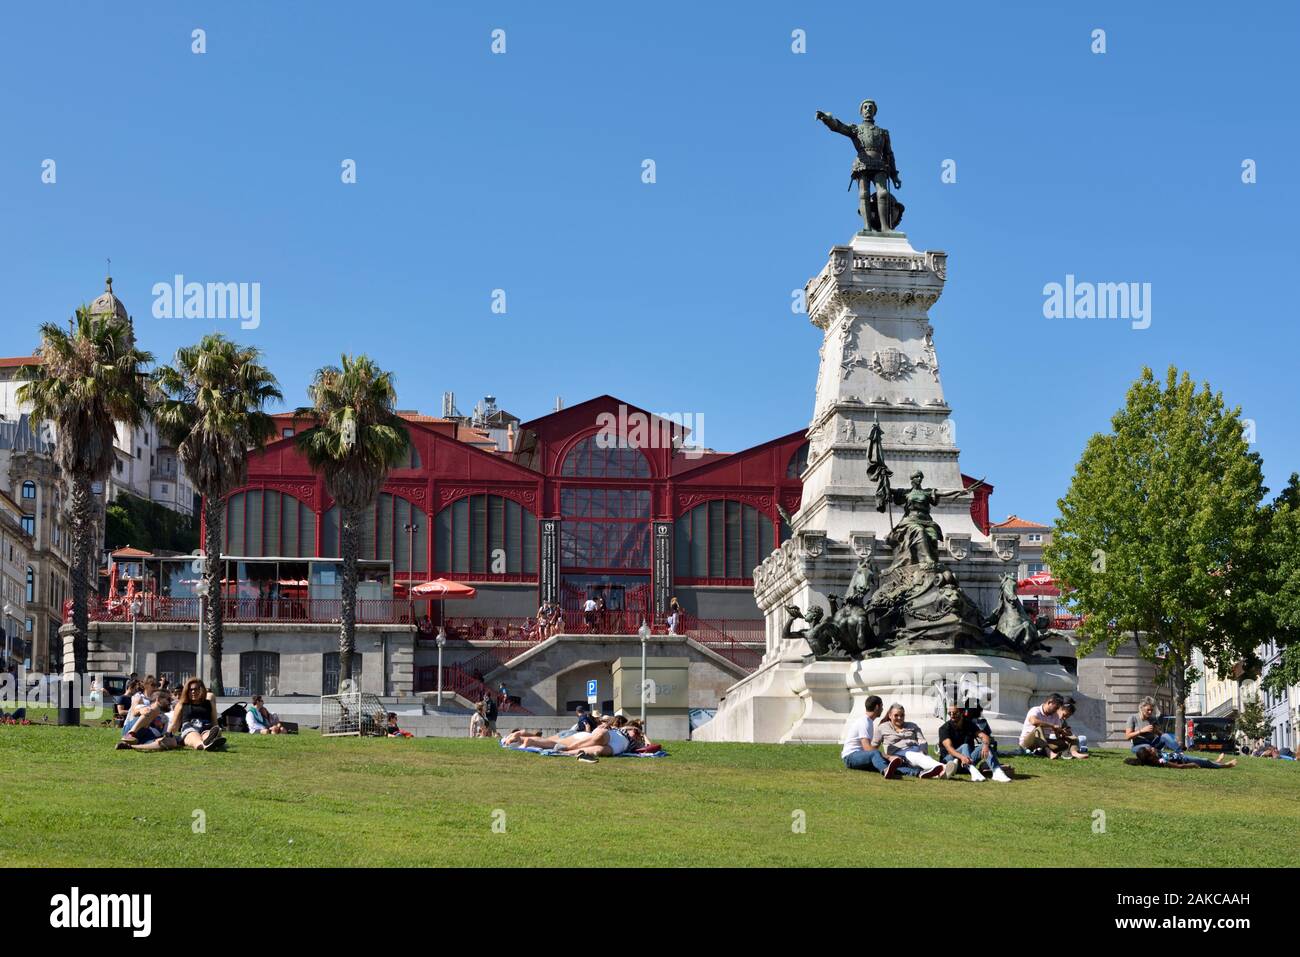 Portugal, North Region, Porto, historical center classified as World Heritage by UNESCO, Ferreira Borges covered market and monument to the Infante Henrique from 1899 Stock Photo